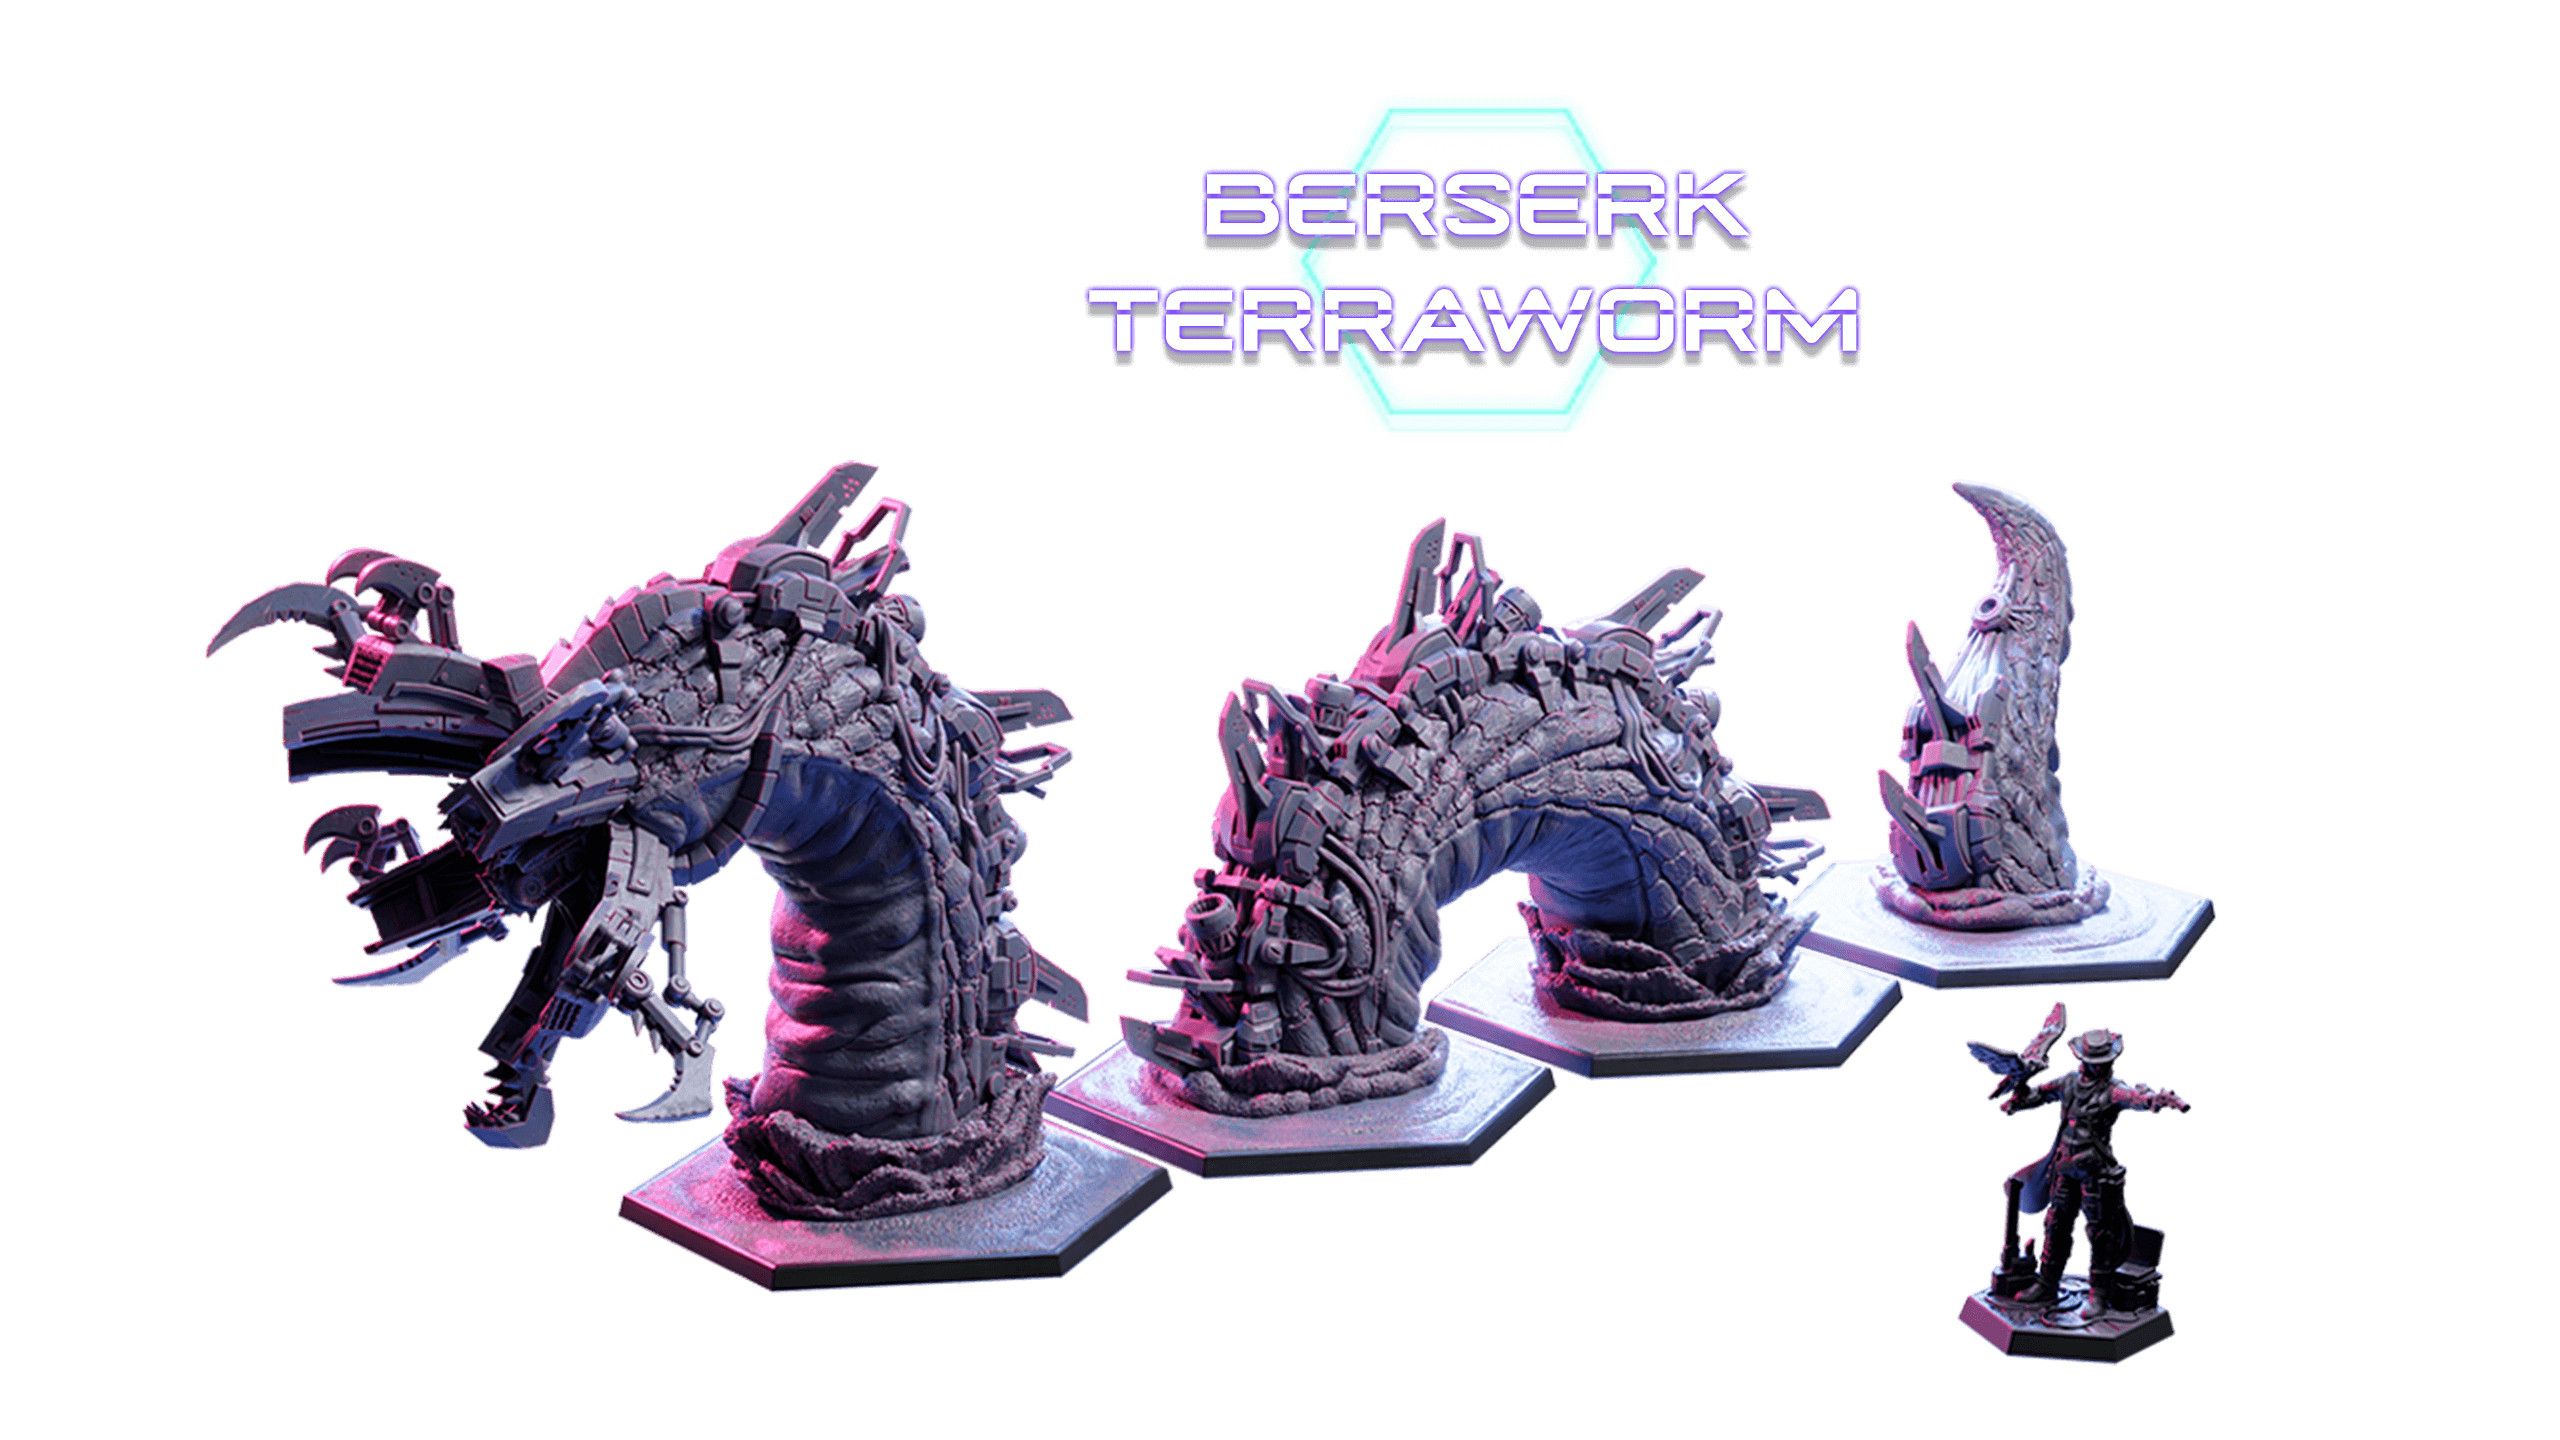 The Terraworm